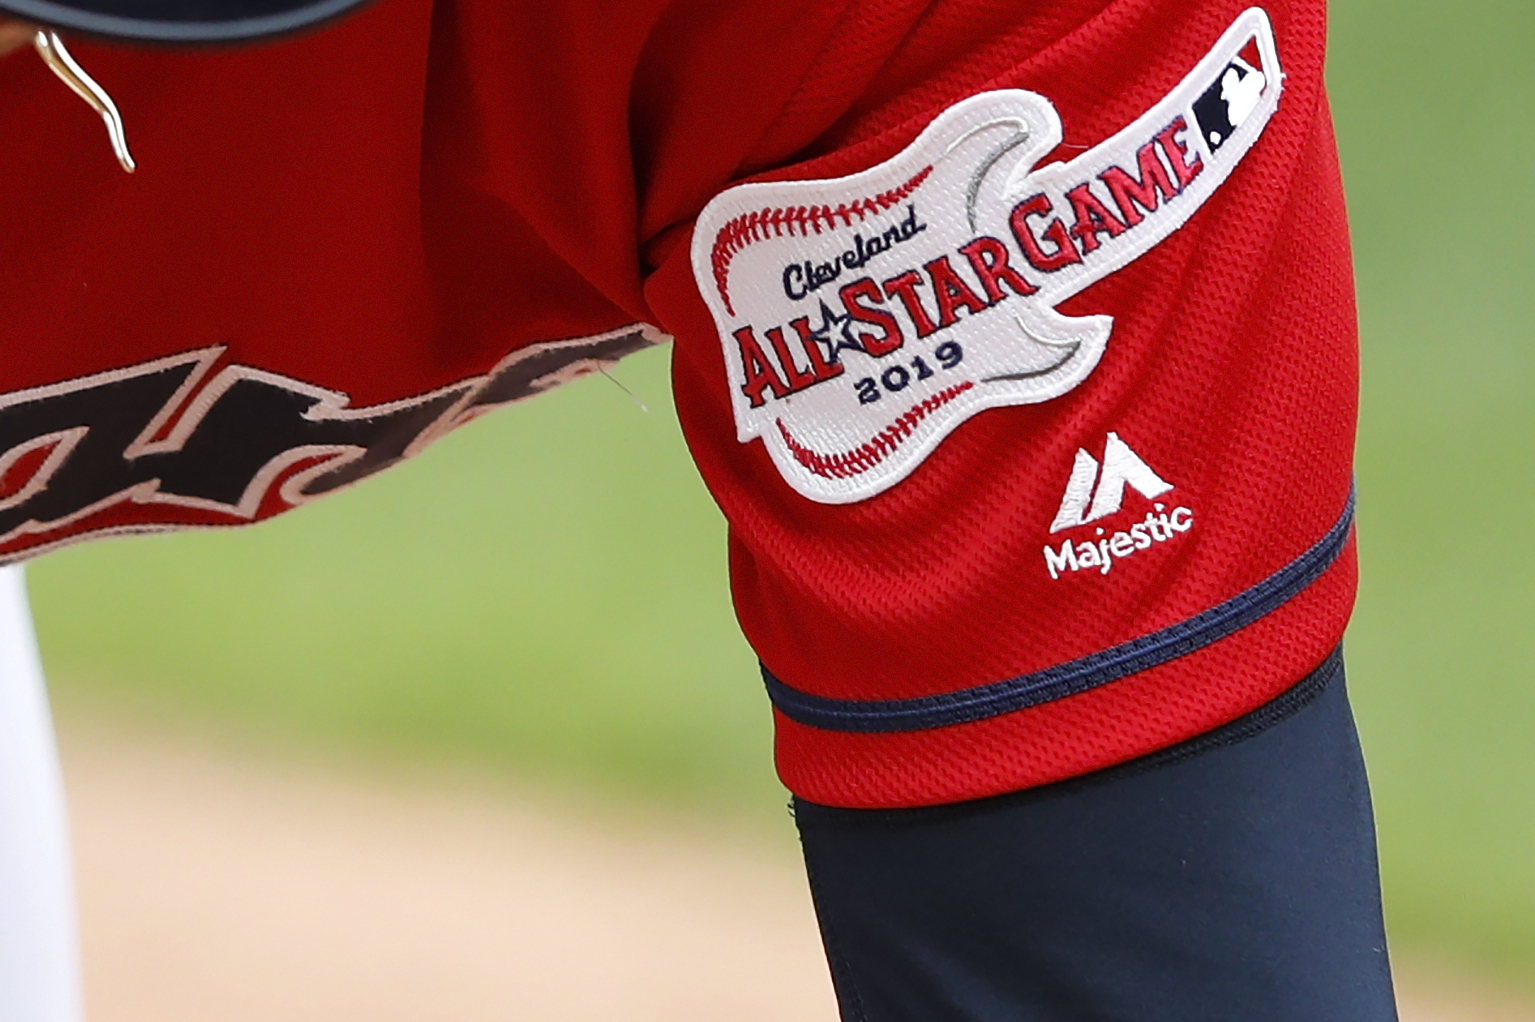 Atlanta Braves: Highlights from the 2019 MLB All-Star game in Cleveland